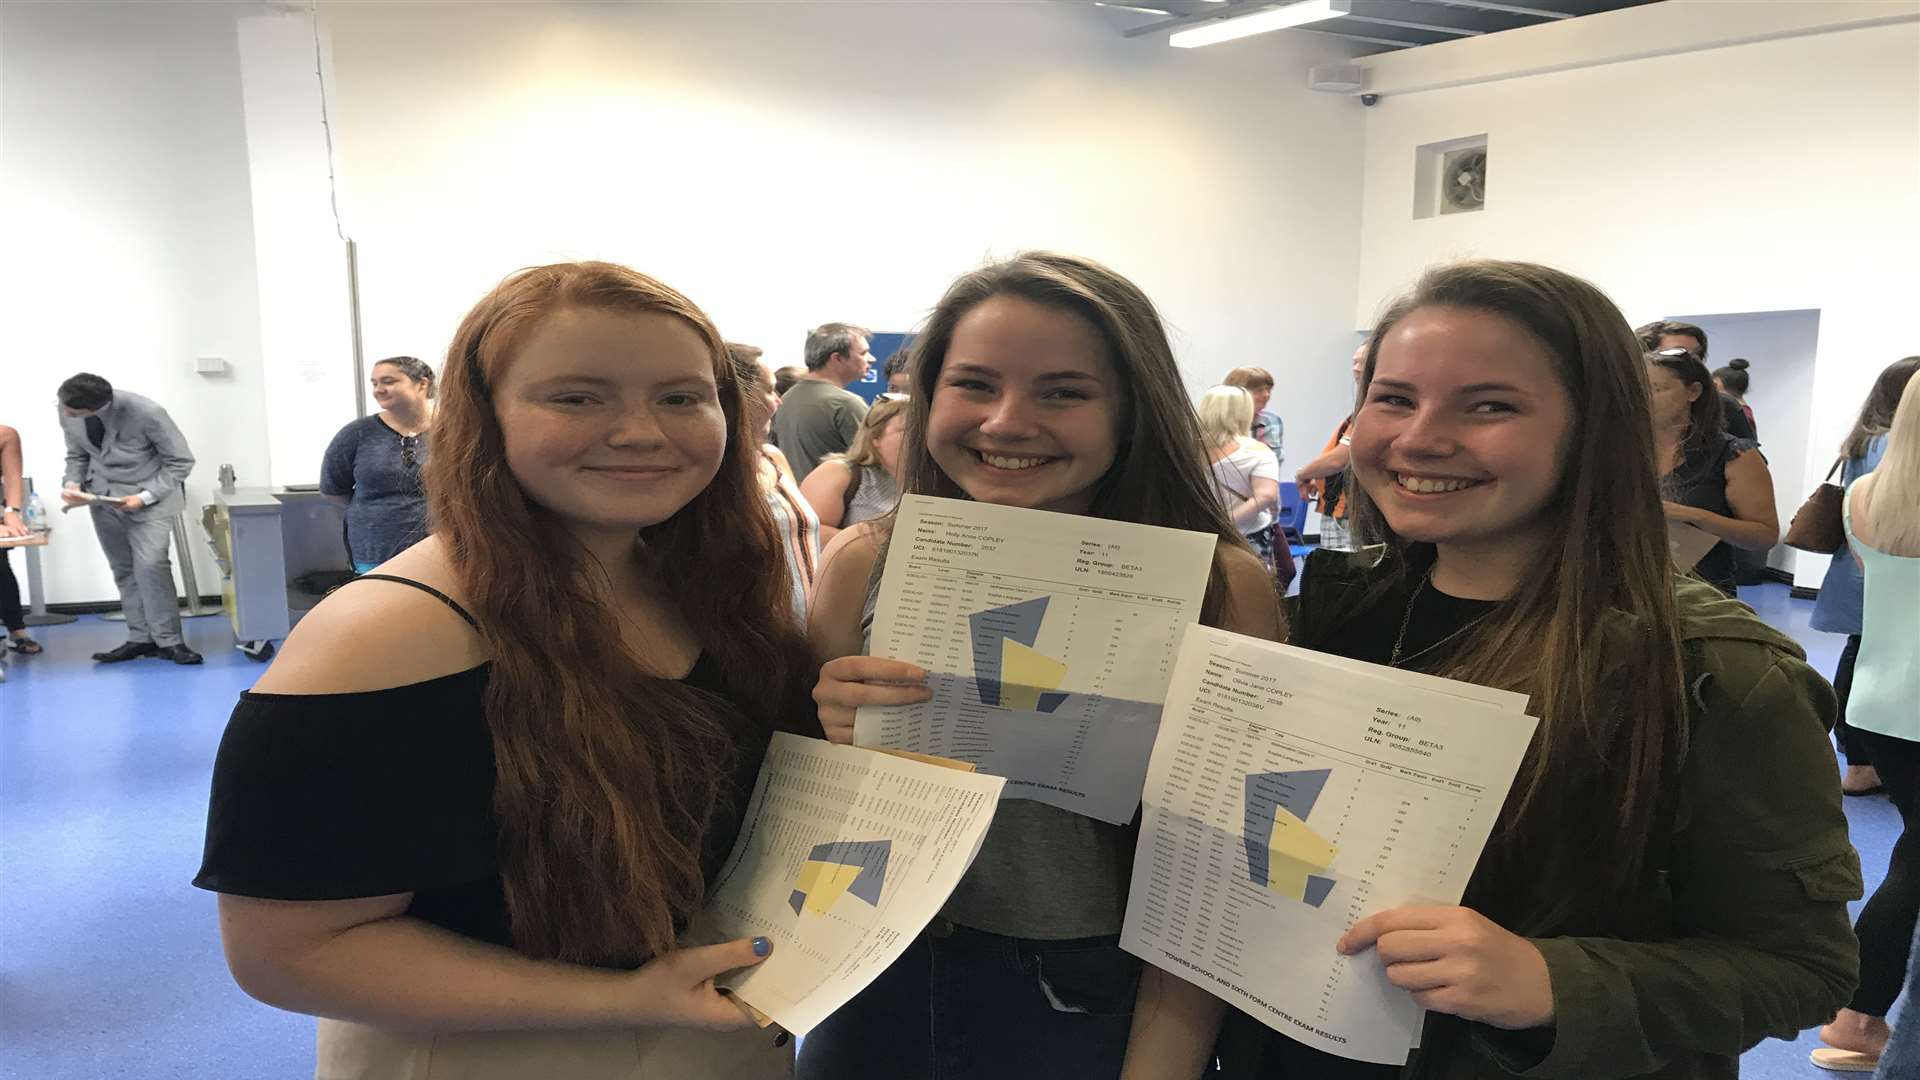 Jaz East, Holly Copley and Olivia Copley were all delighted with their results